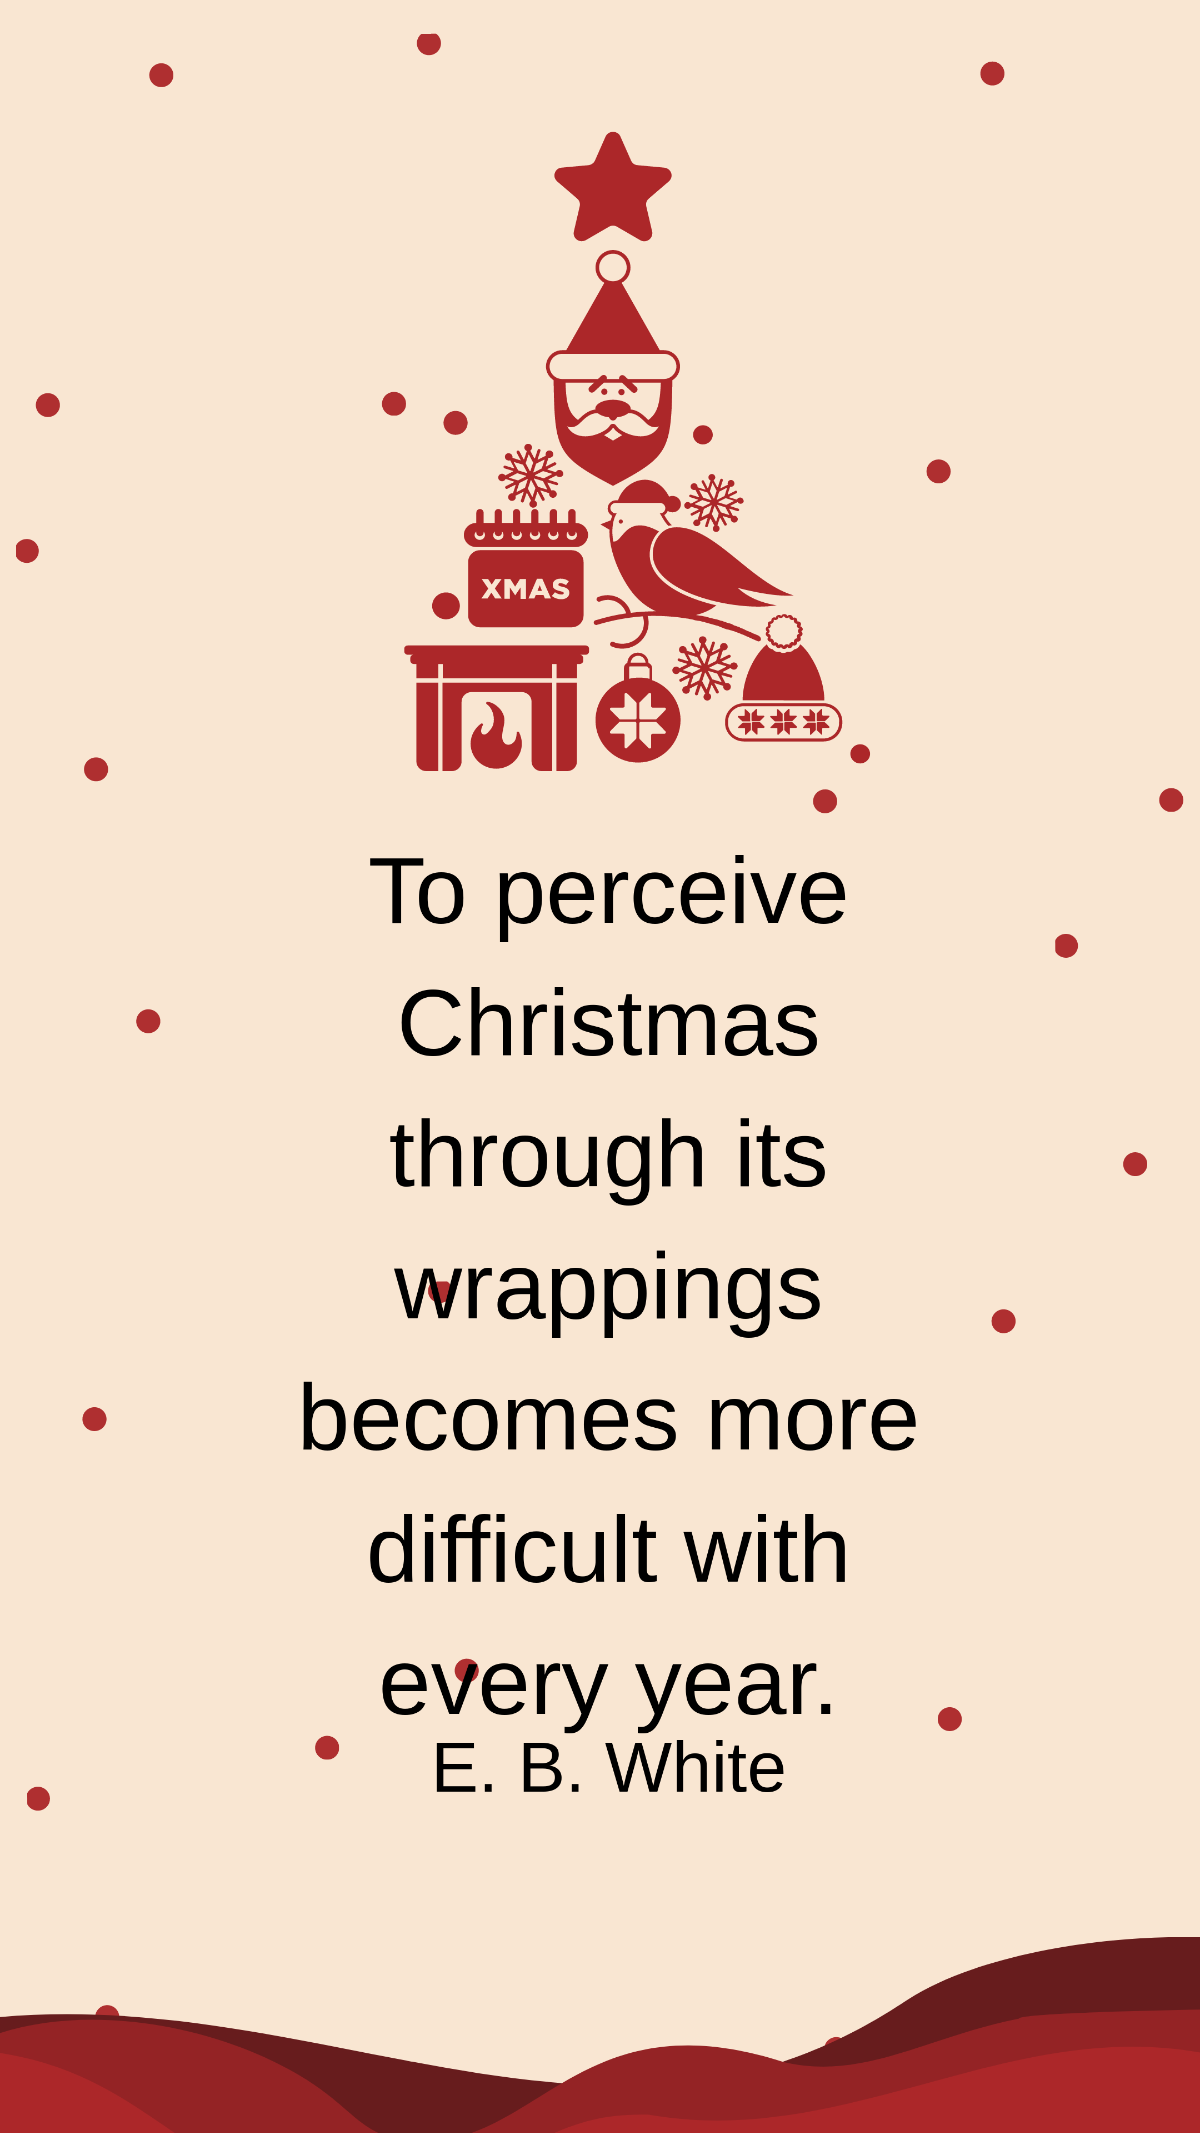 E. B. White - To perceive Christmas through its wrappings becomes more difficult with every year. Template